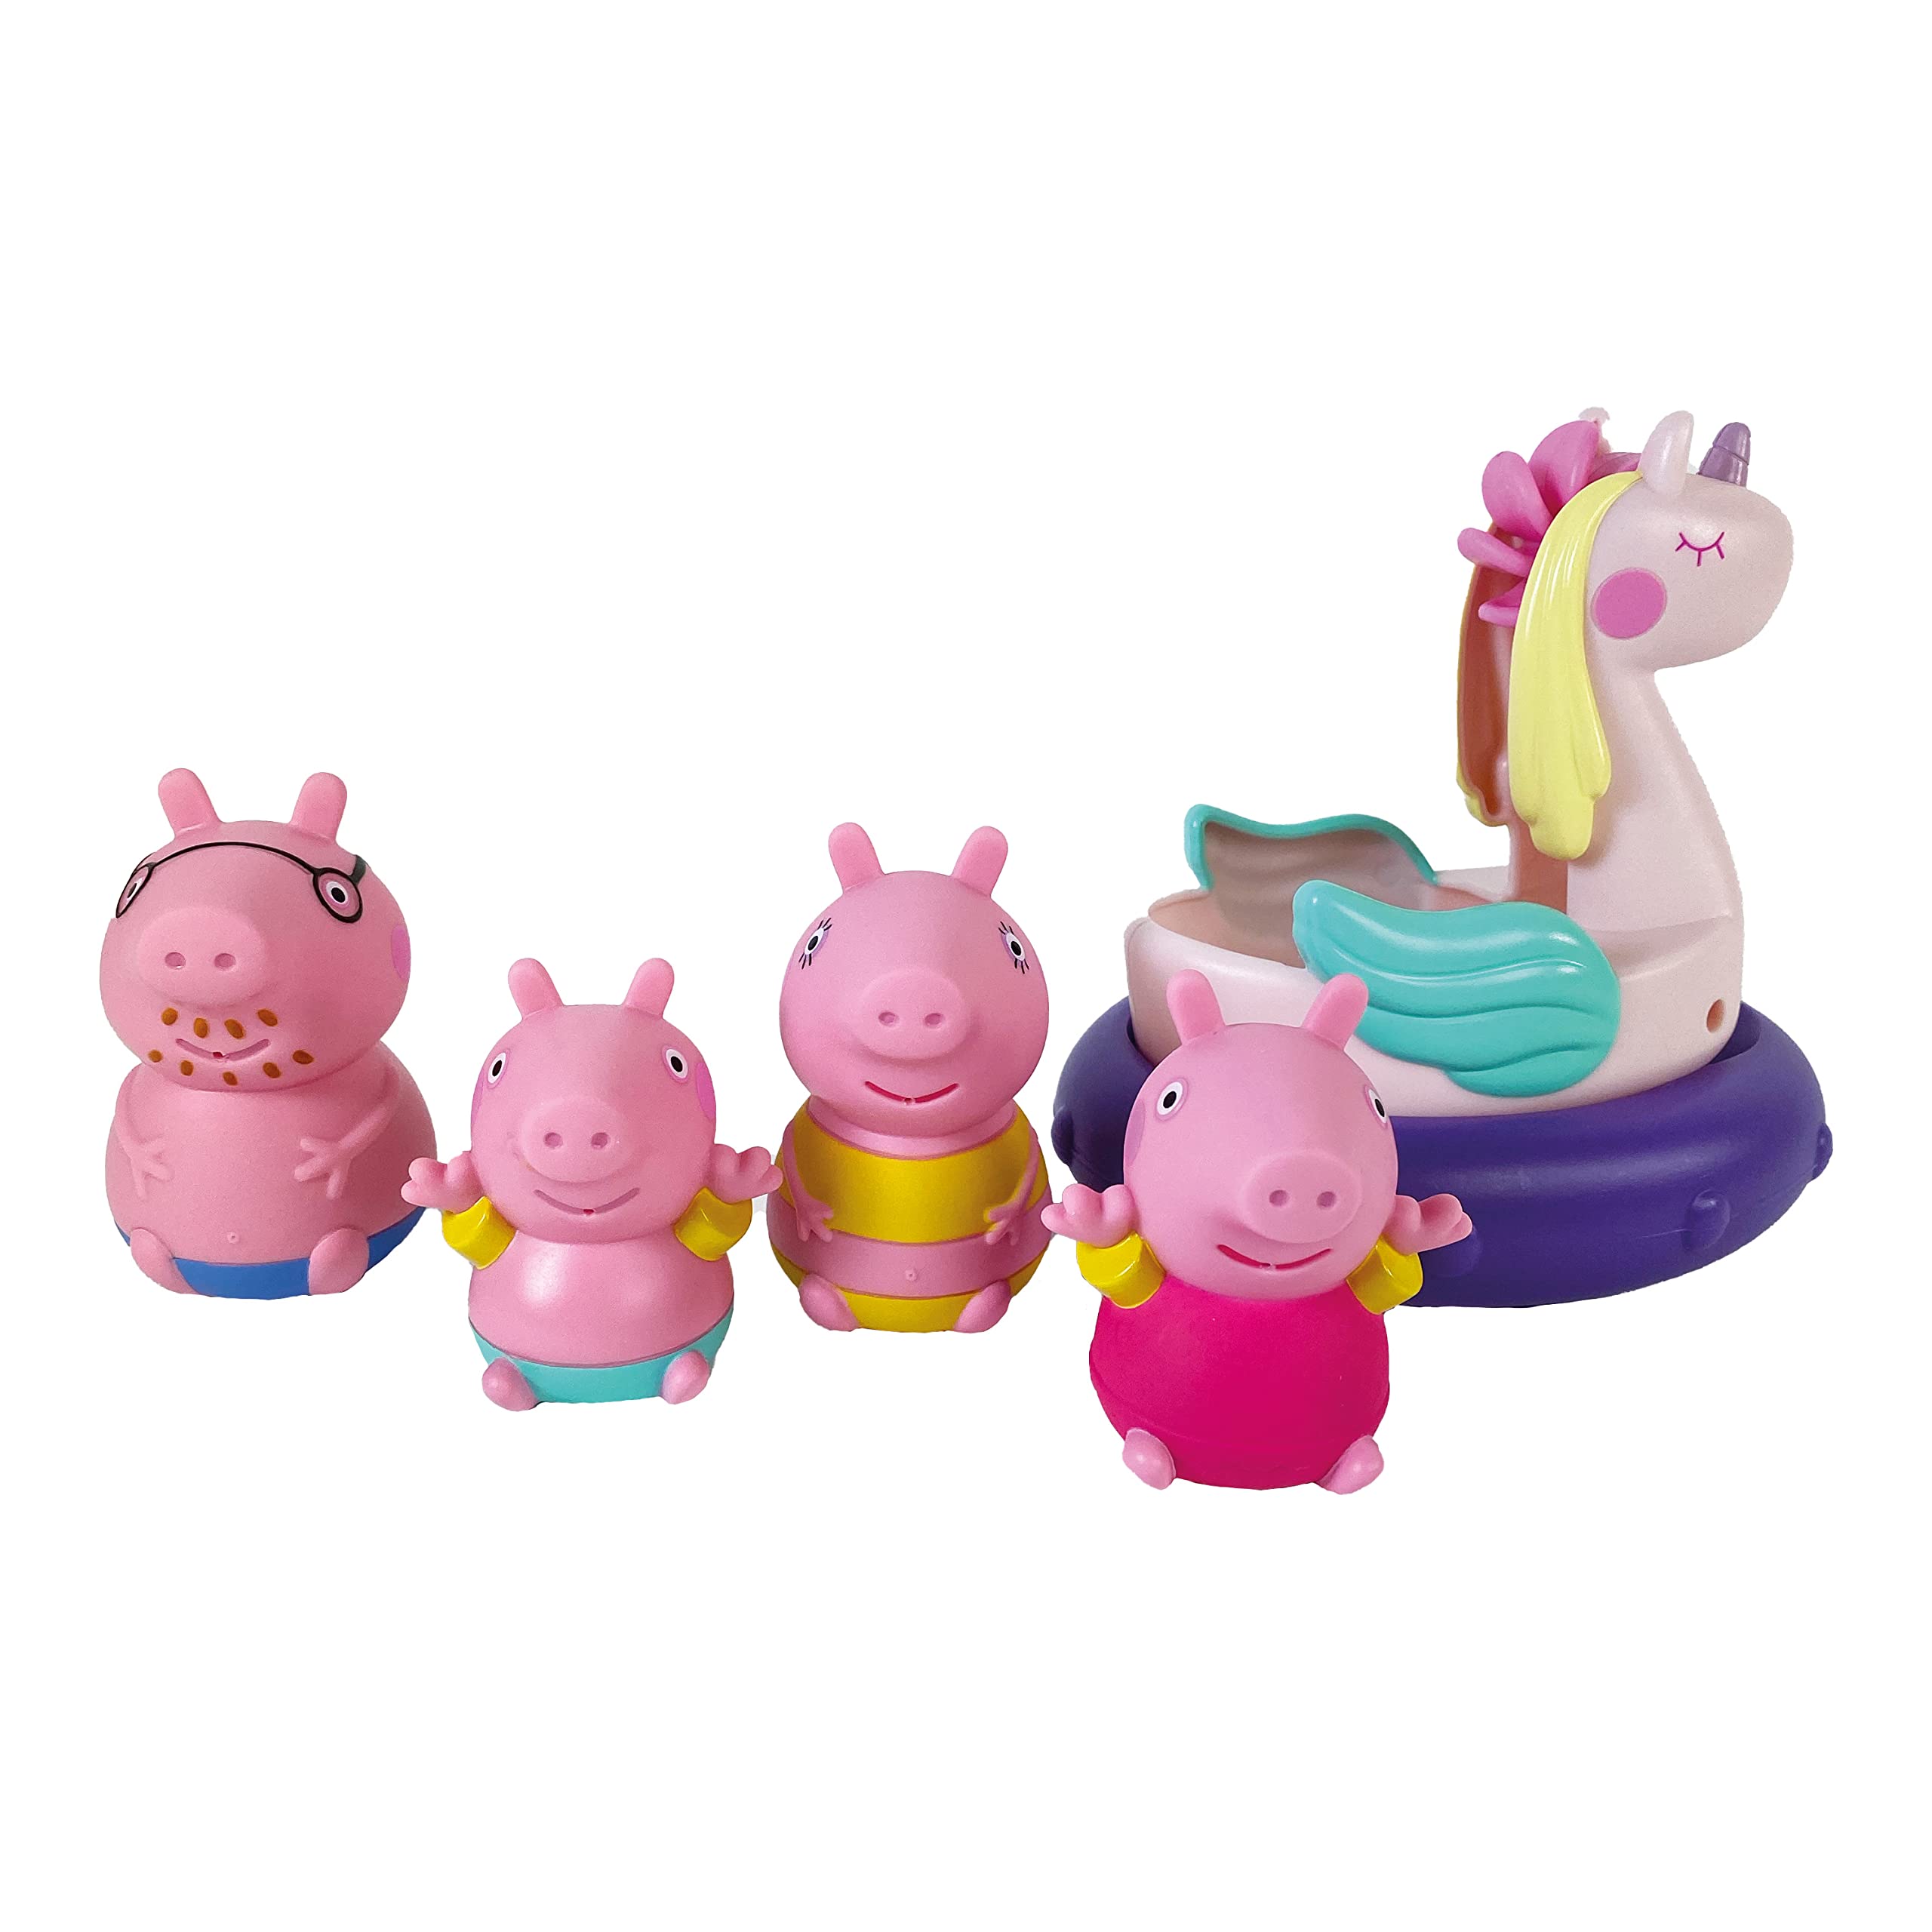 Tomy Peppa Pig Bath Toys - Baby Bath Toys Promote Dexterity and Motor Skills - Toddler Toys for Bath and Pool - Bath Toys for girls a